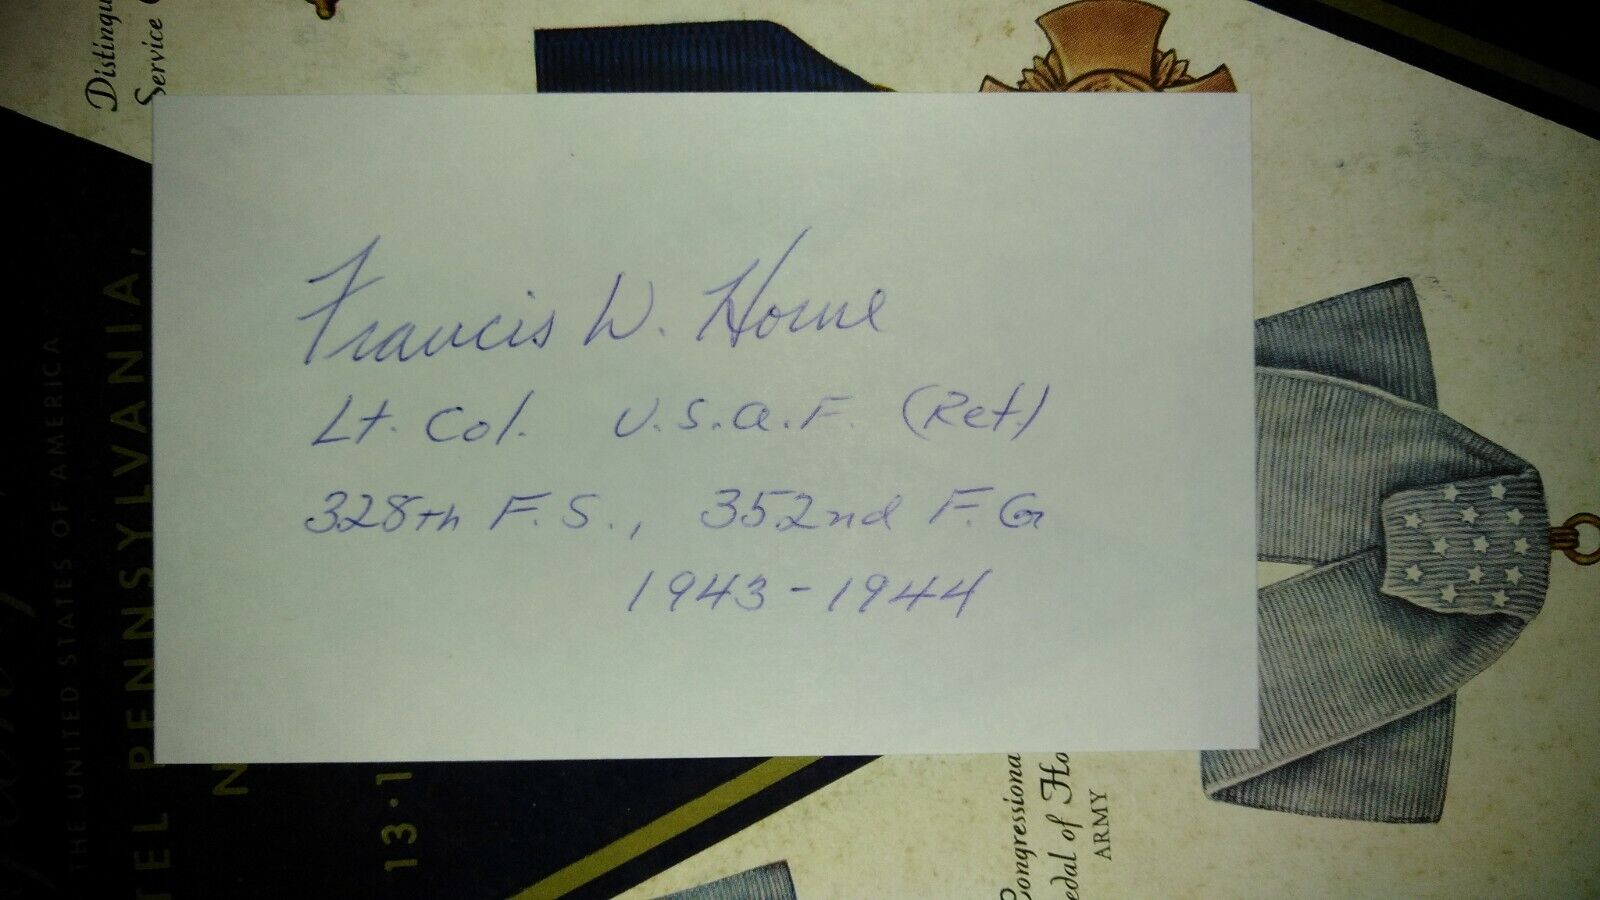 WWII Ace Lt. Col. FRANCIS W. HORNE, 5Vs 328th FS 352nd FG Signed 3x5 VERY SCARCE